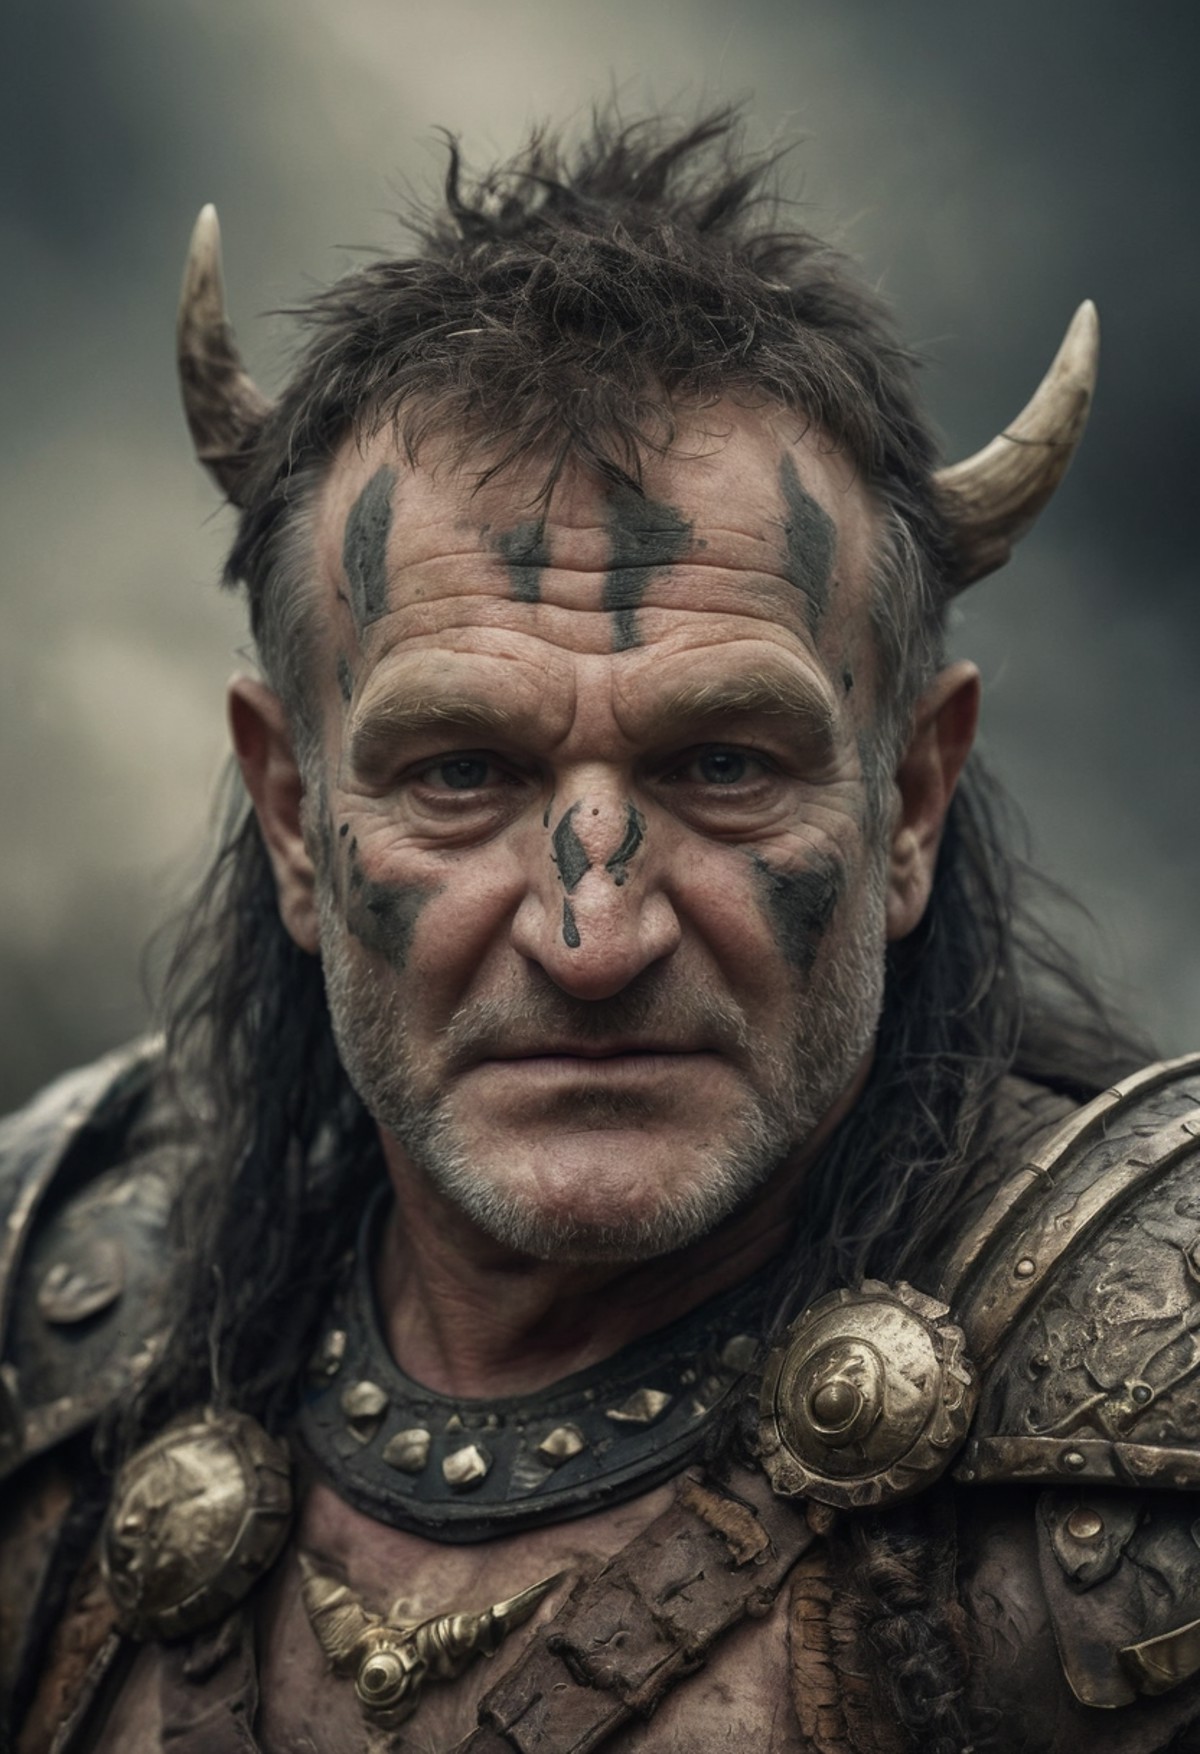 A striking photograph portraying Mork (Robin Williams) transformed into an orc warrior, blending whimsy with fantasy in th...